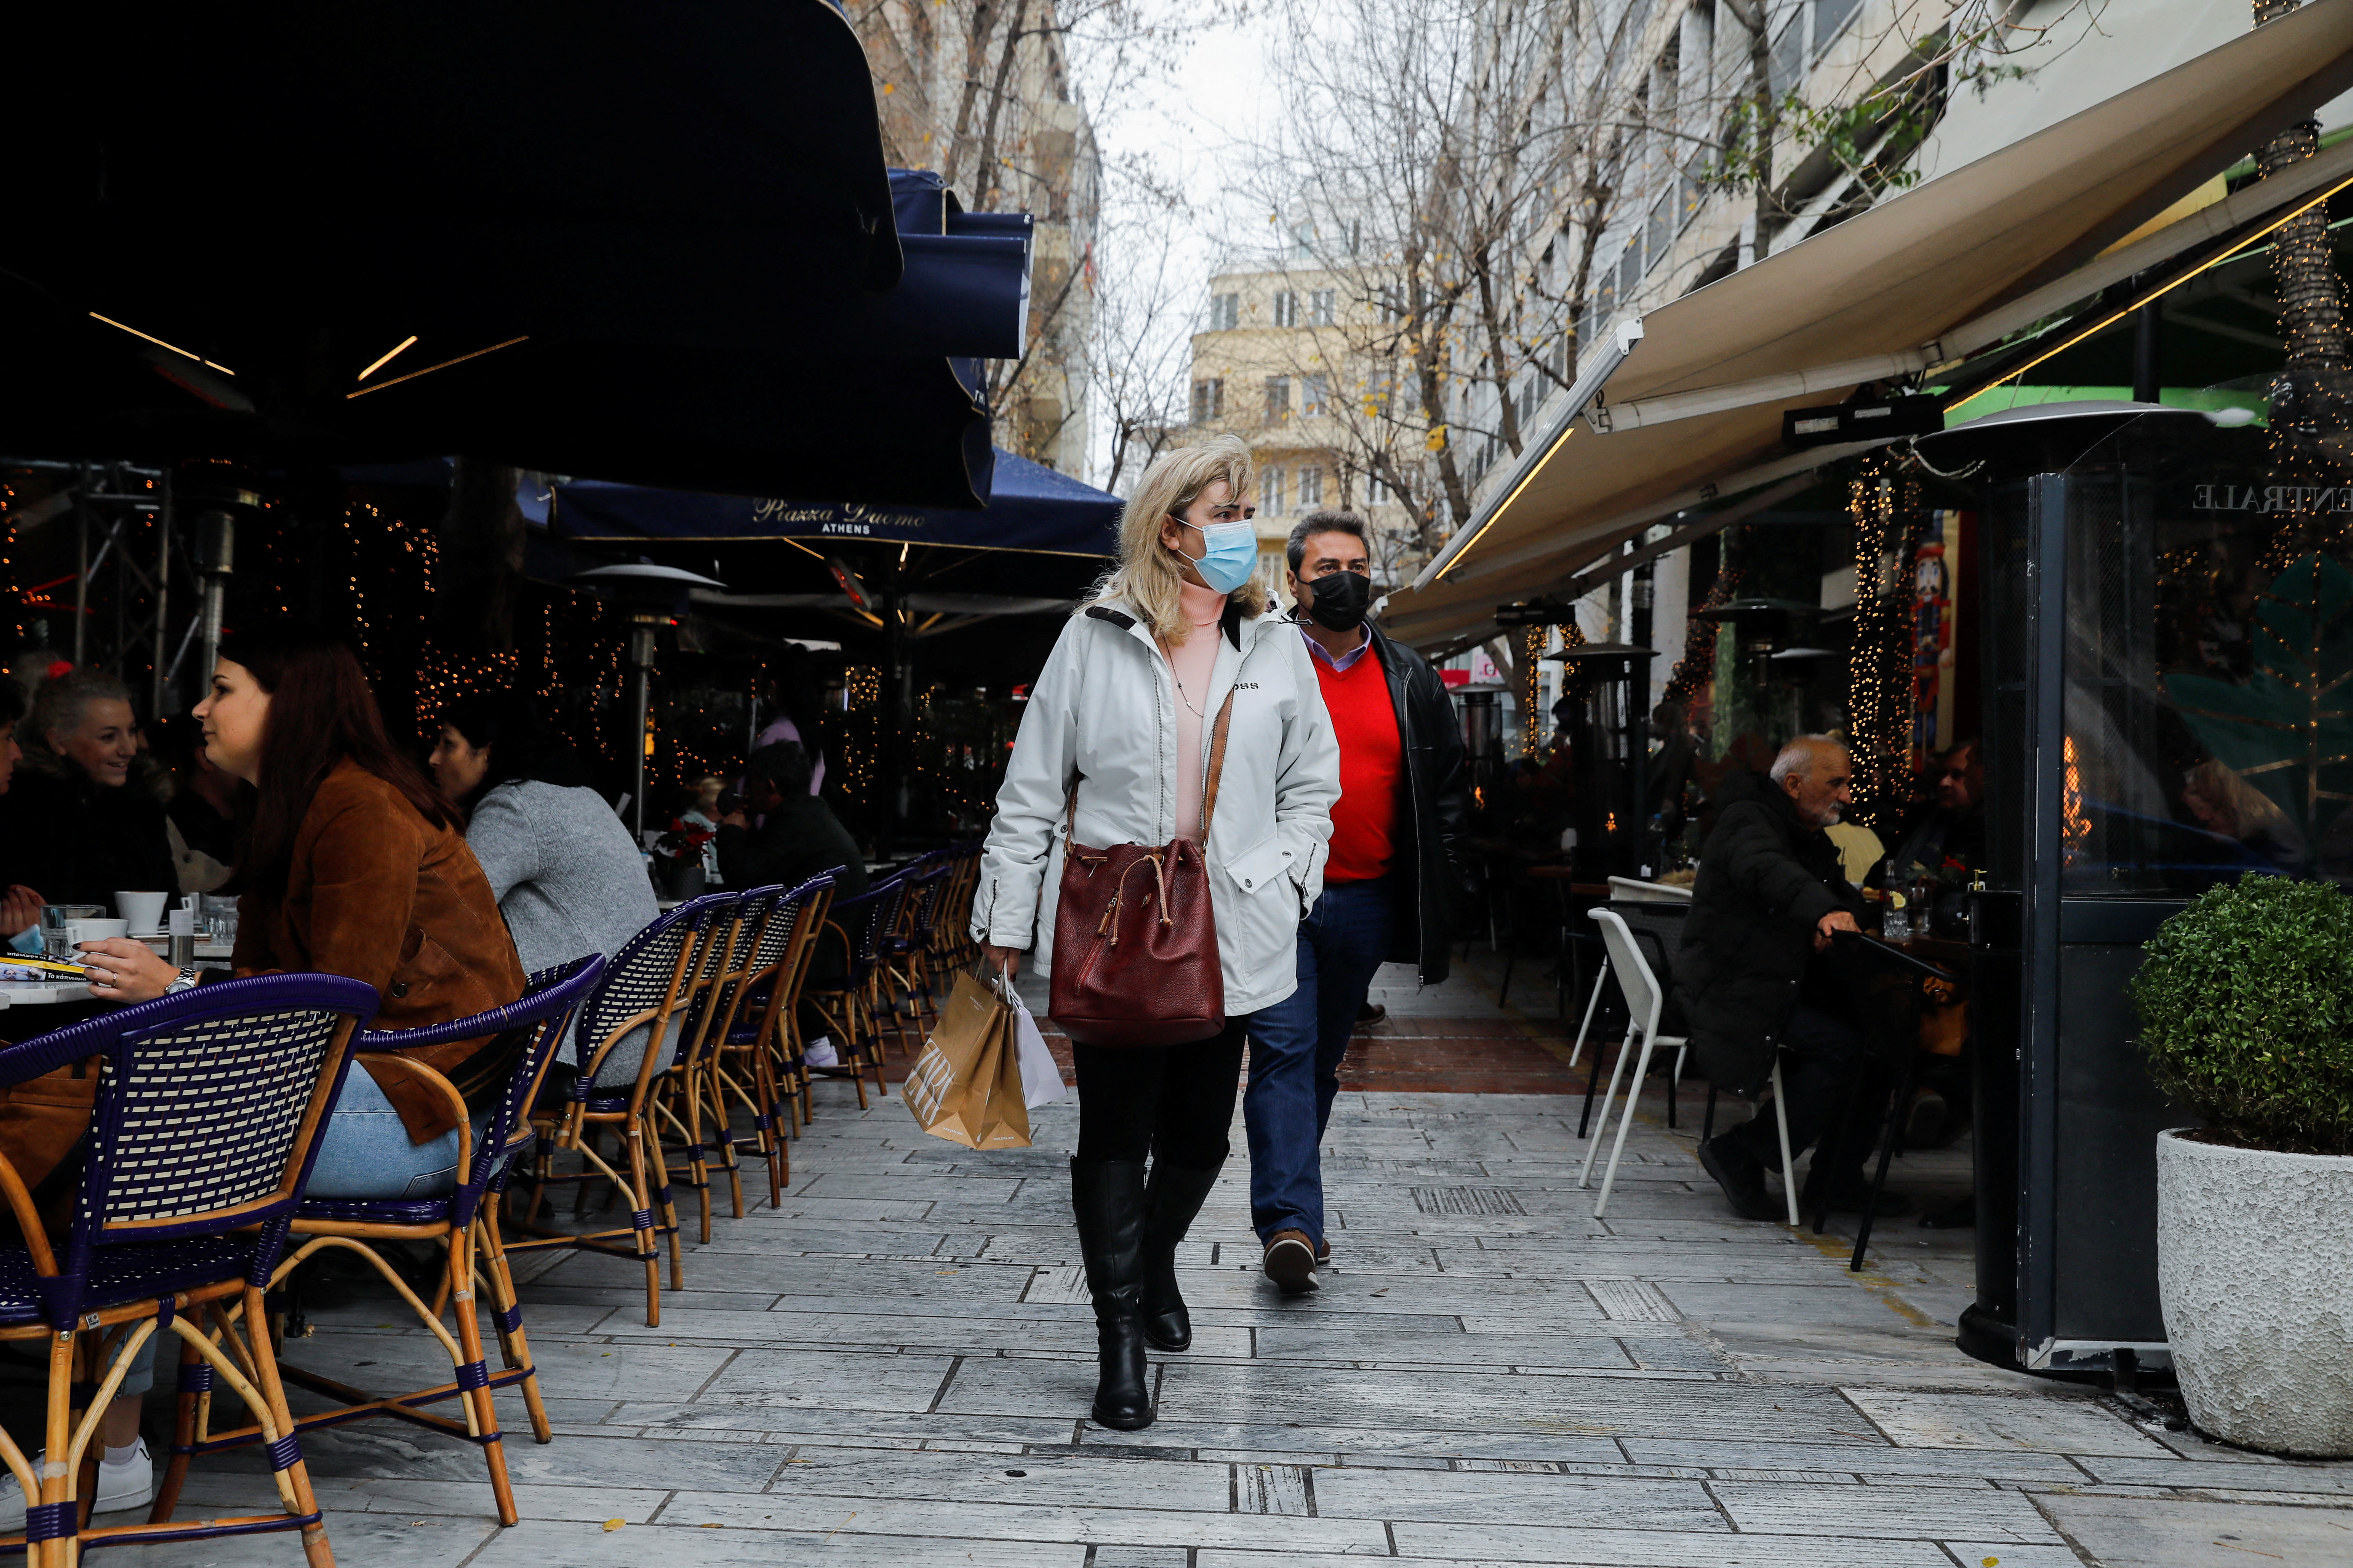 People wearing protective face masks walk past a cafe amid the coronavirus disease (COVID-19) outbreak in Athens